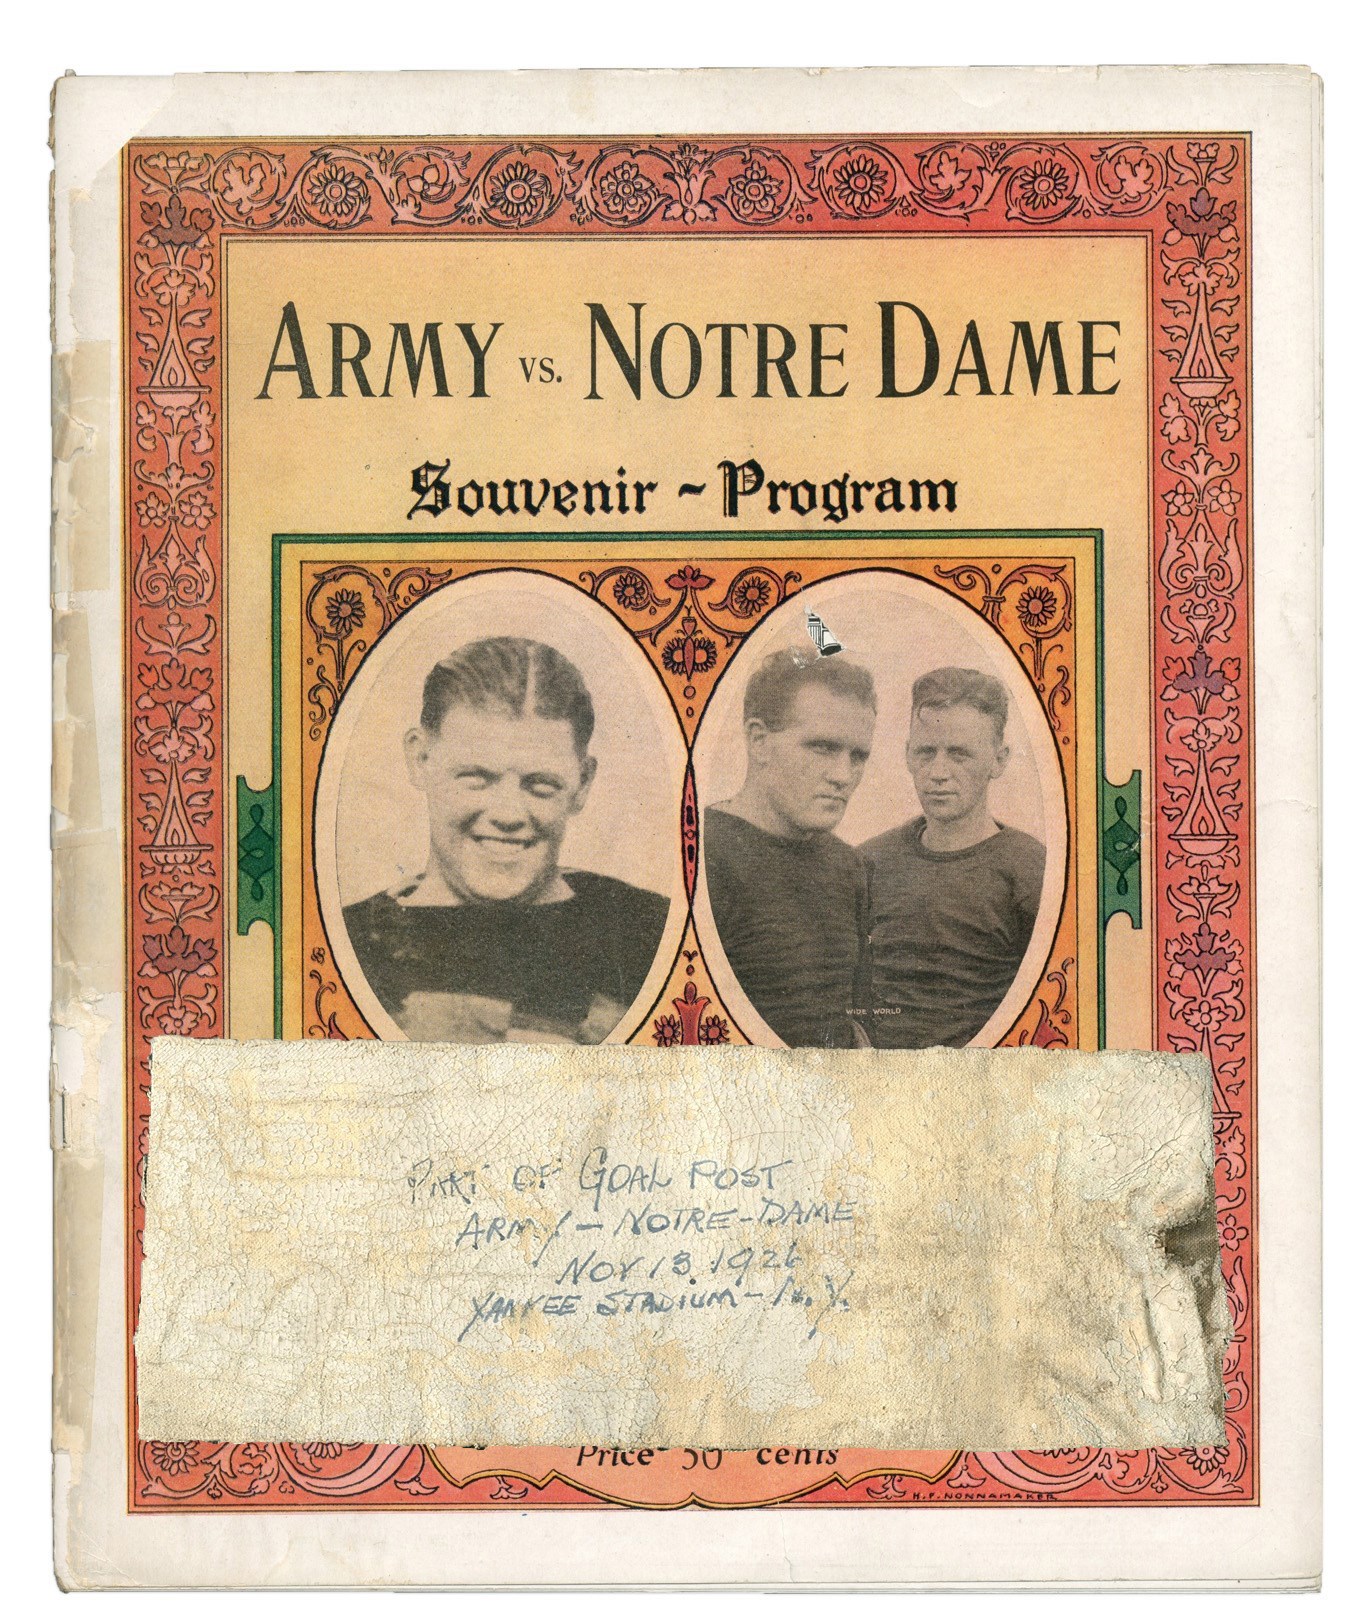 - Piece of the Goalpost from One of the Greatest College Football Games Ever Played (1926 Army vs. ND)